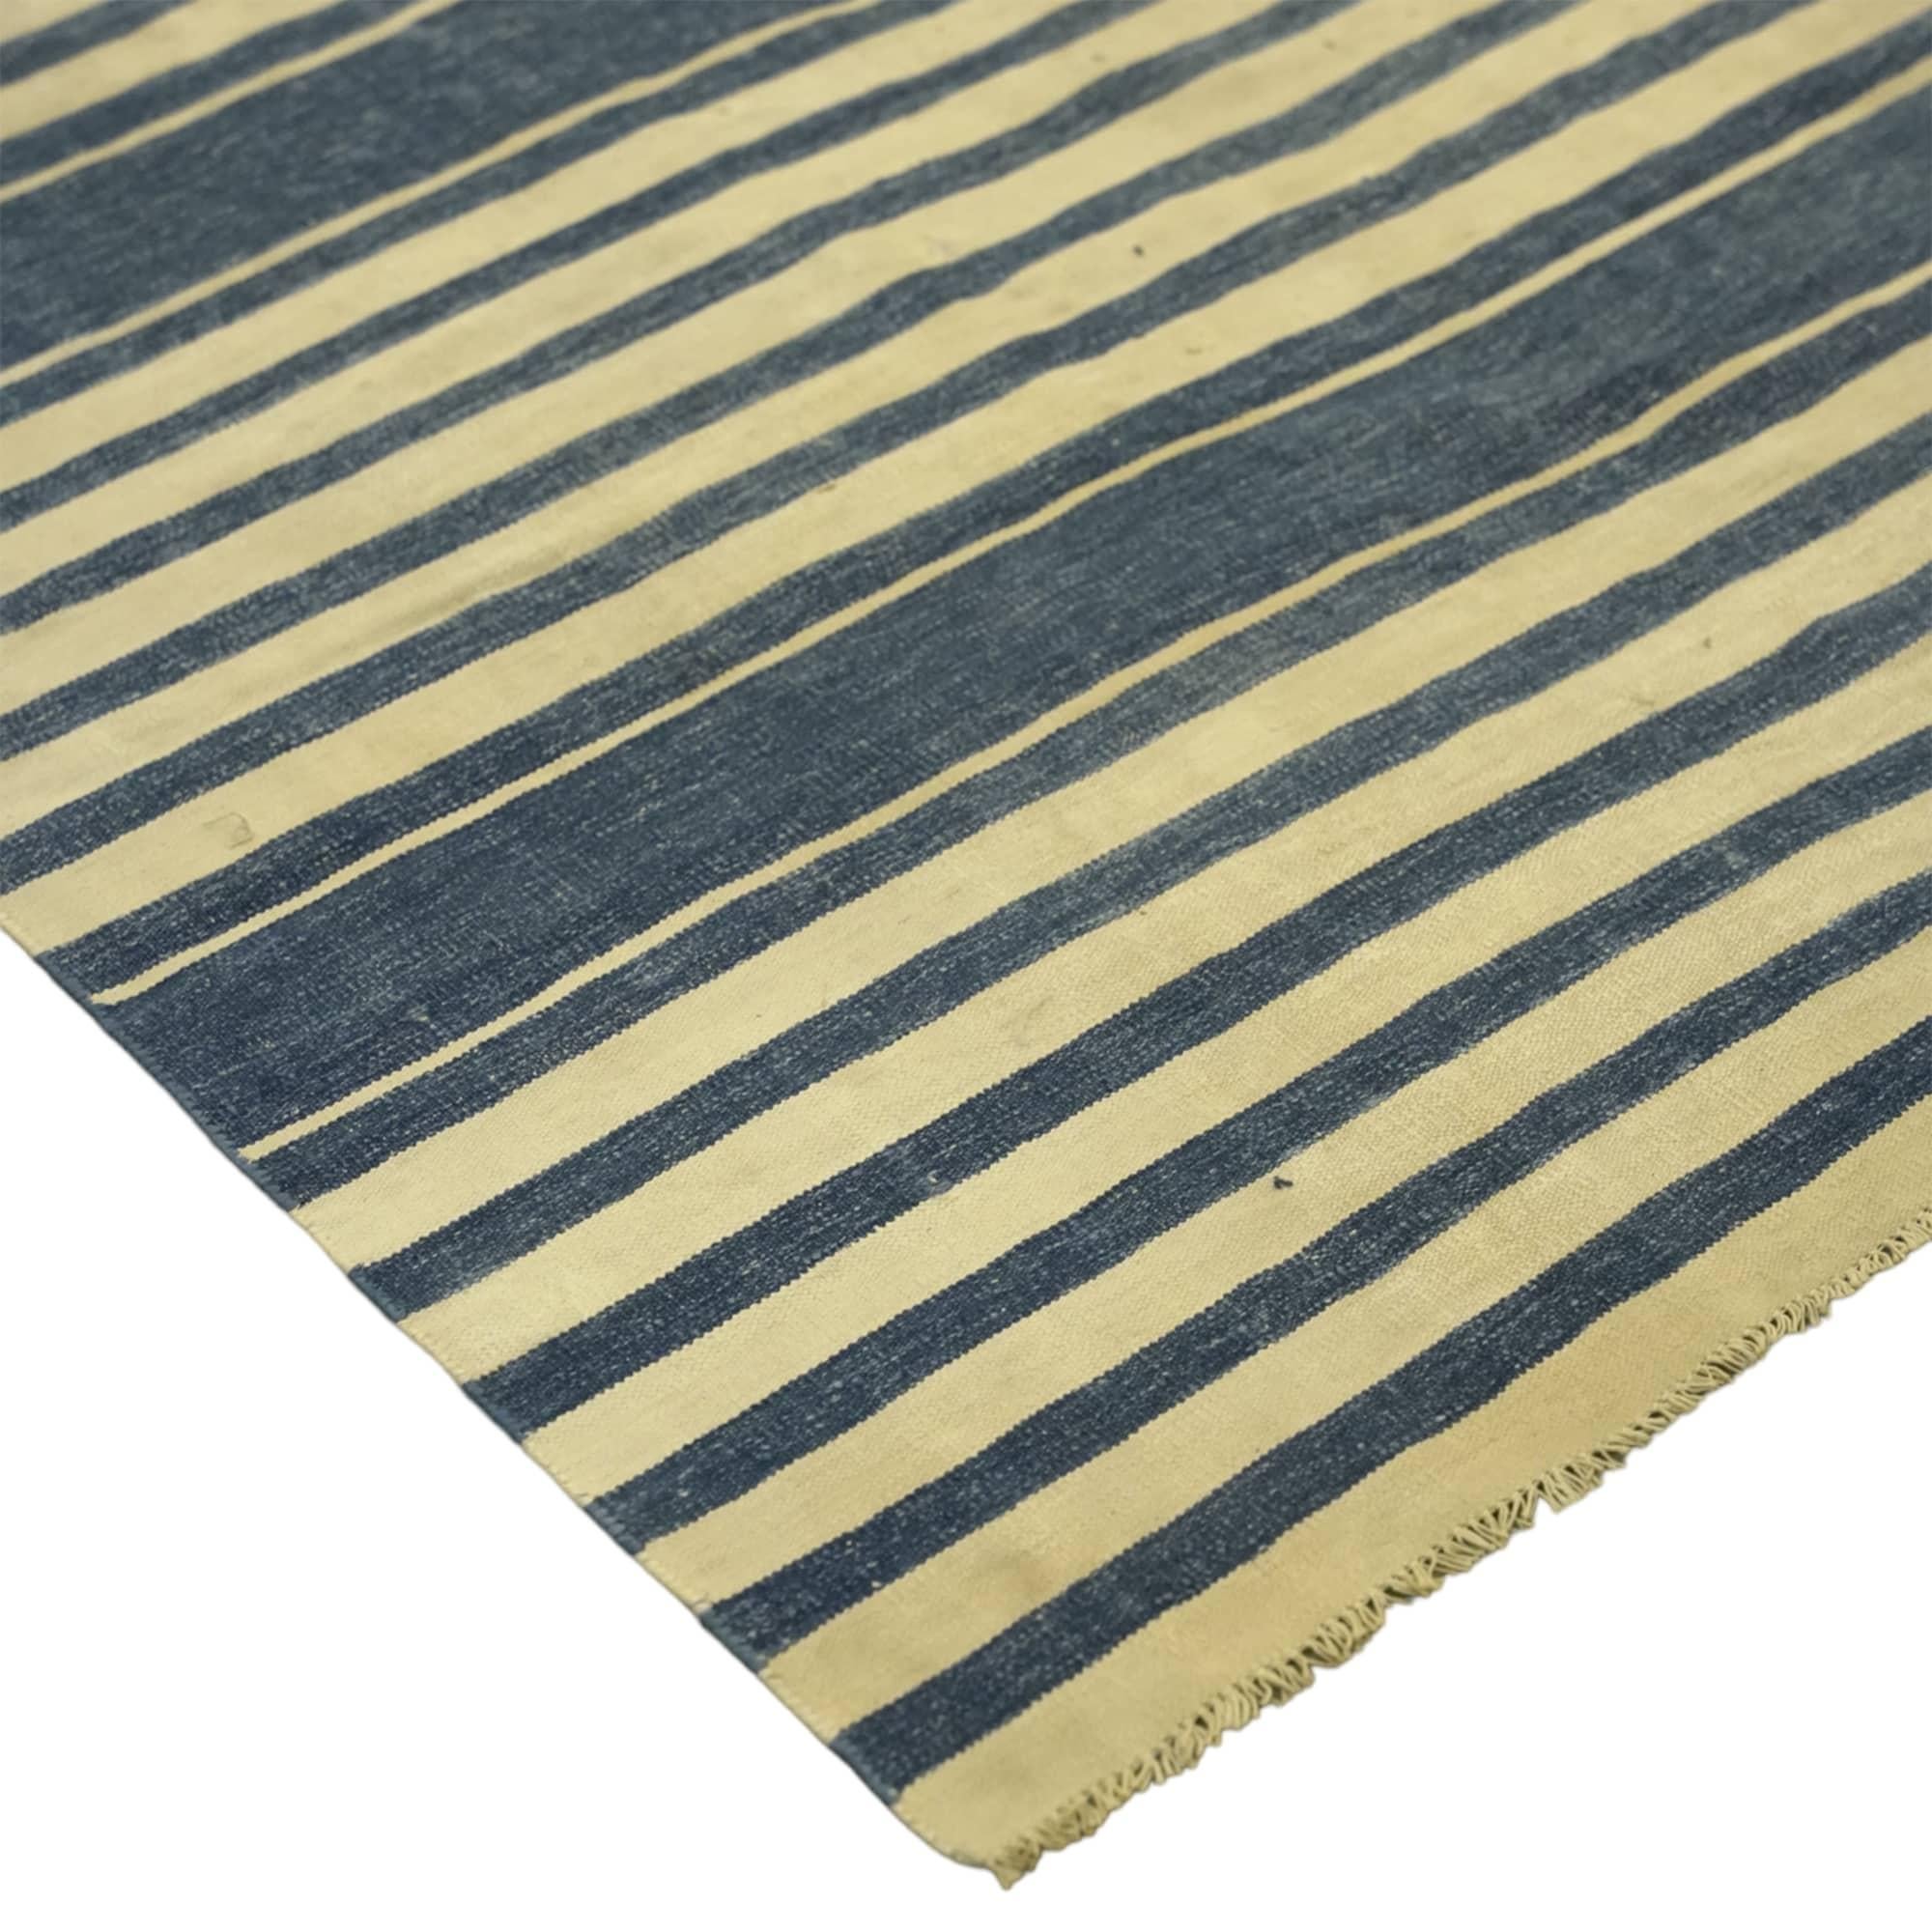 Vintage Dhurrie Rug with Stripes, from Rug & Kilim In Good Condition For Sale In Long Island City, NY